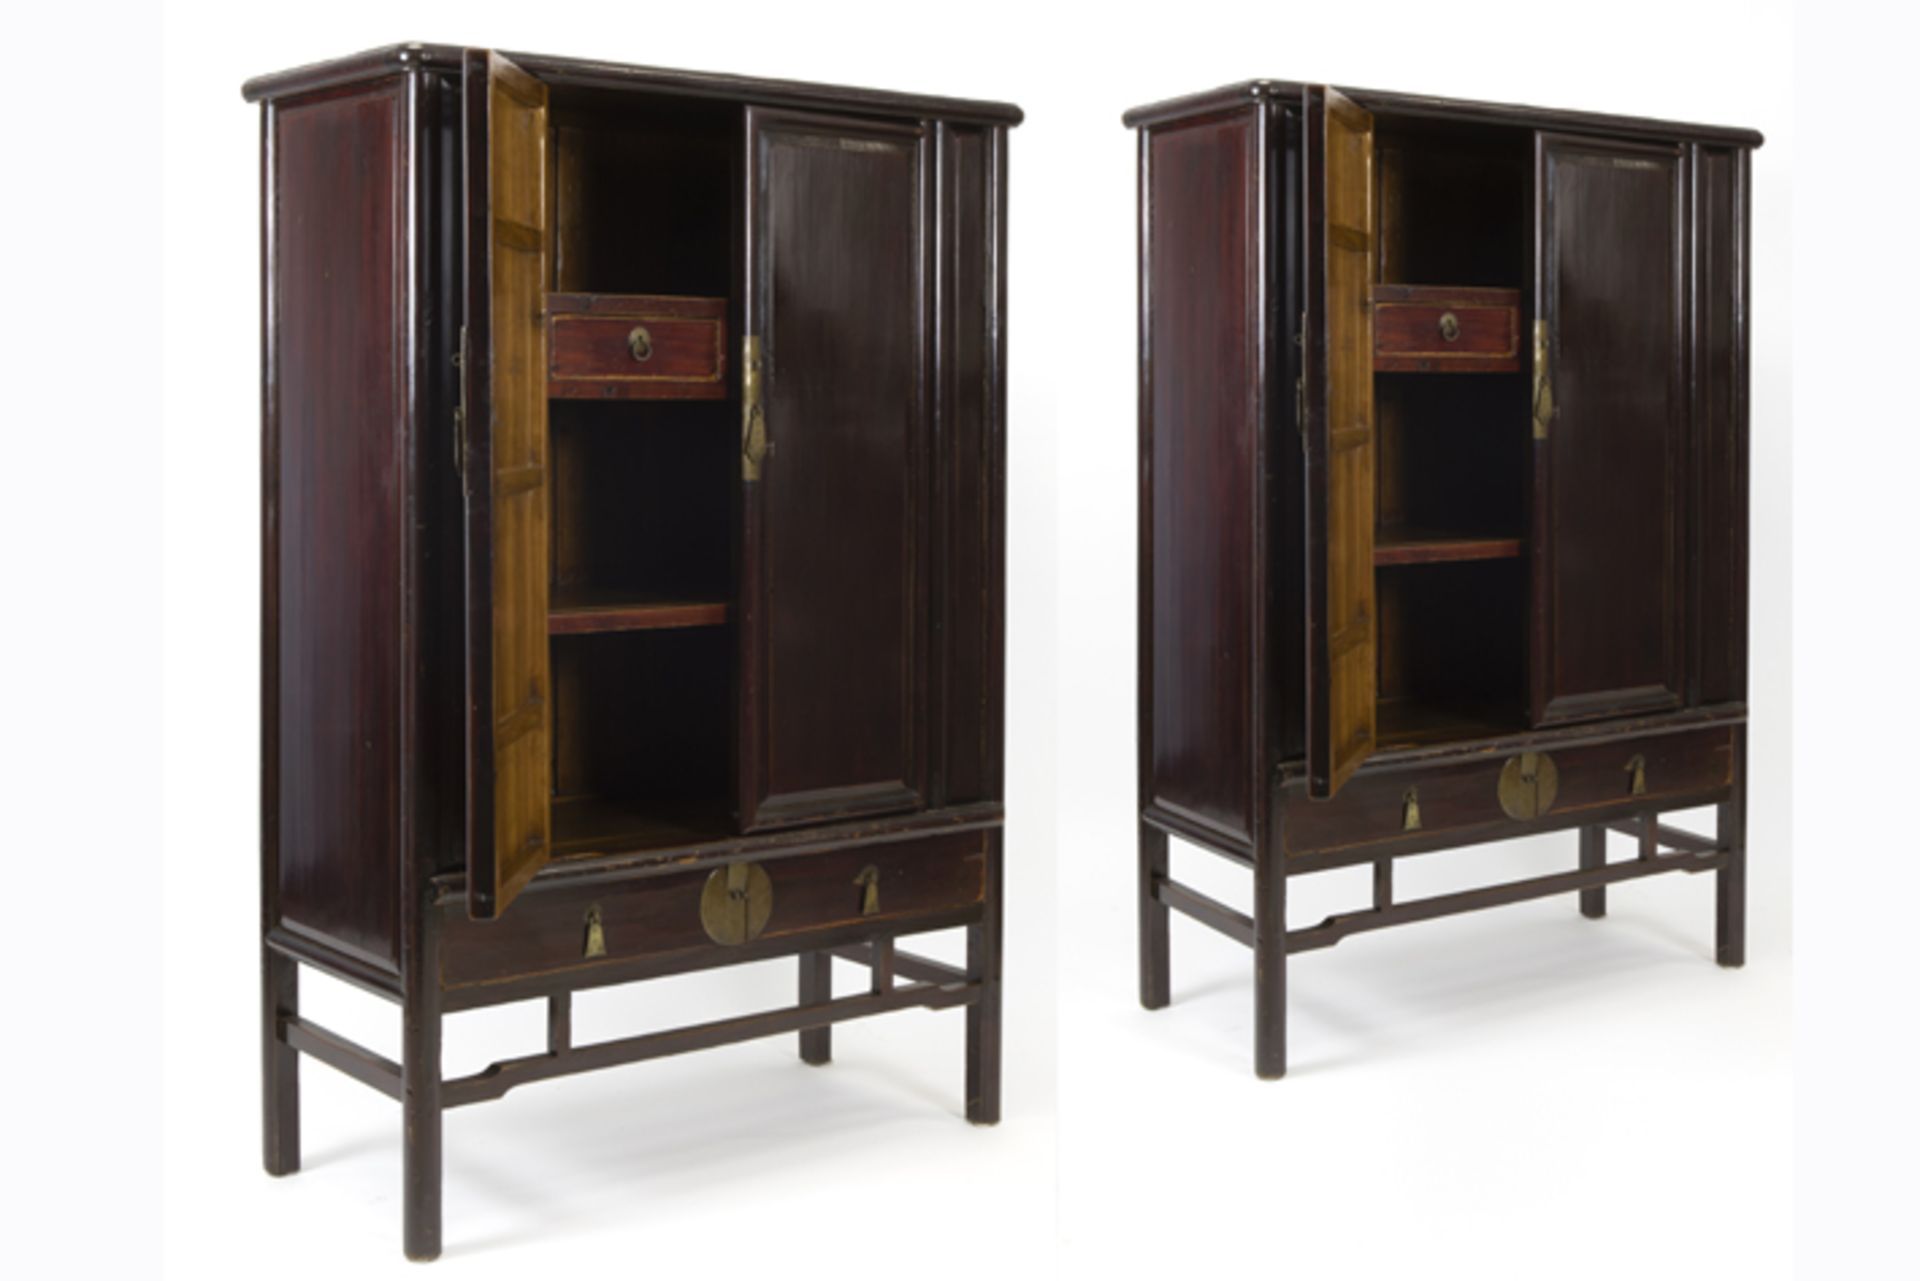 pair of antique Chinese Qing dynasty cabinets in lacquered wood - - CHINA - [...] - Image 2 of 2